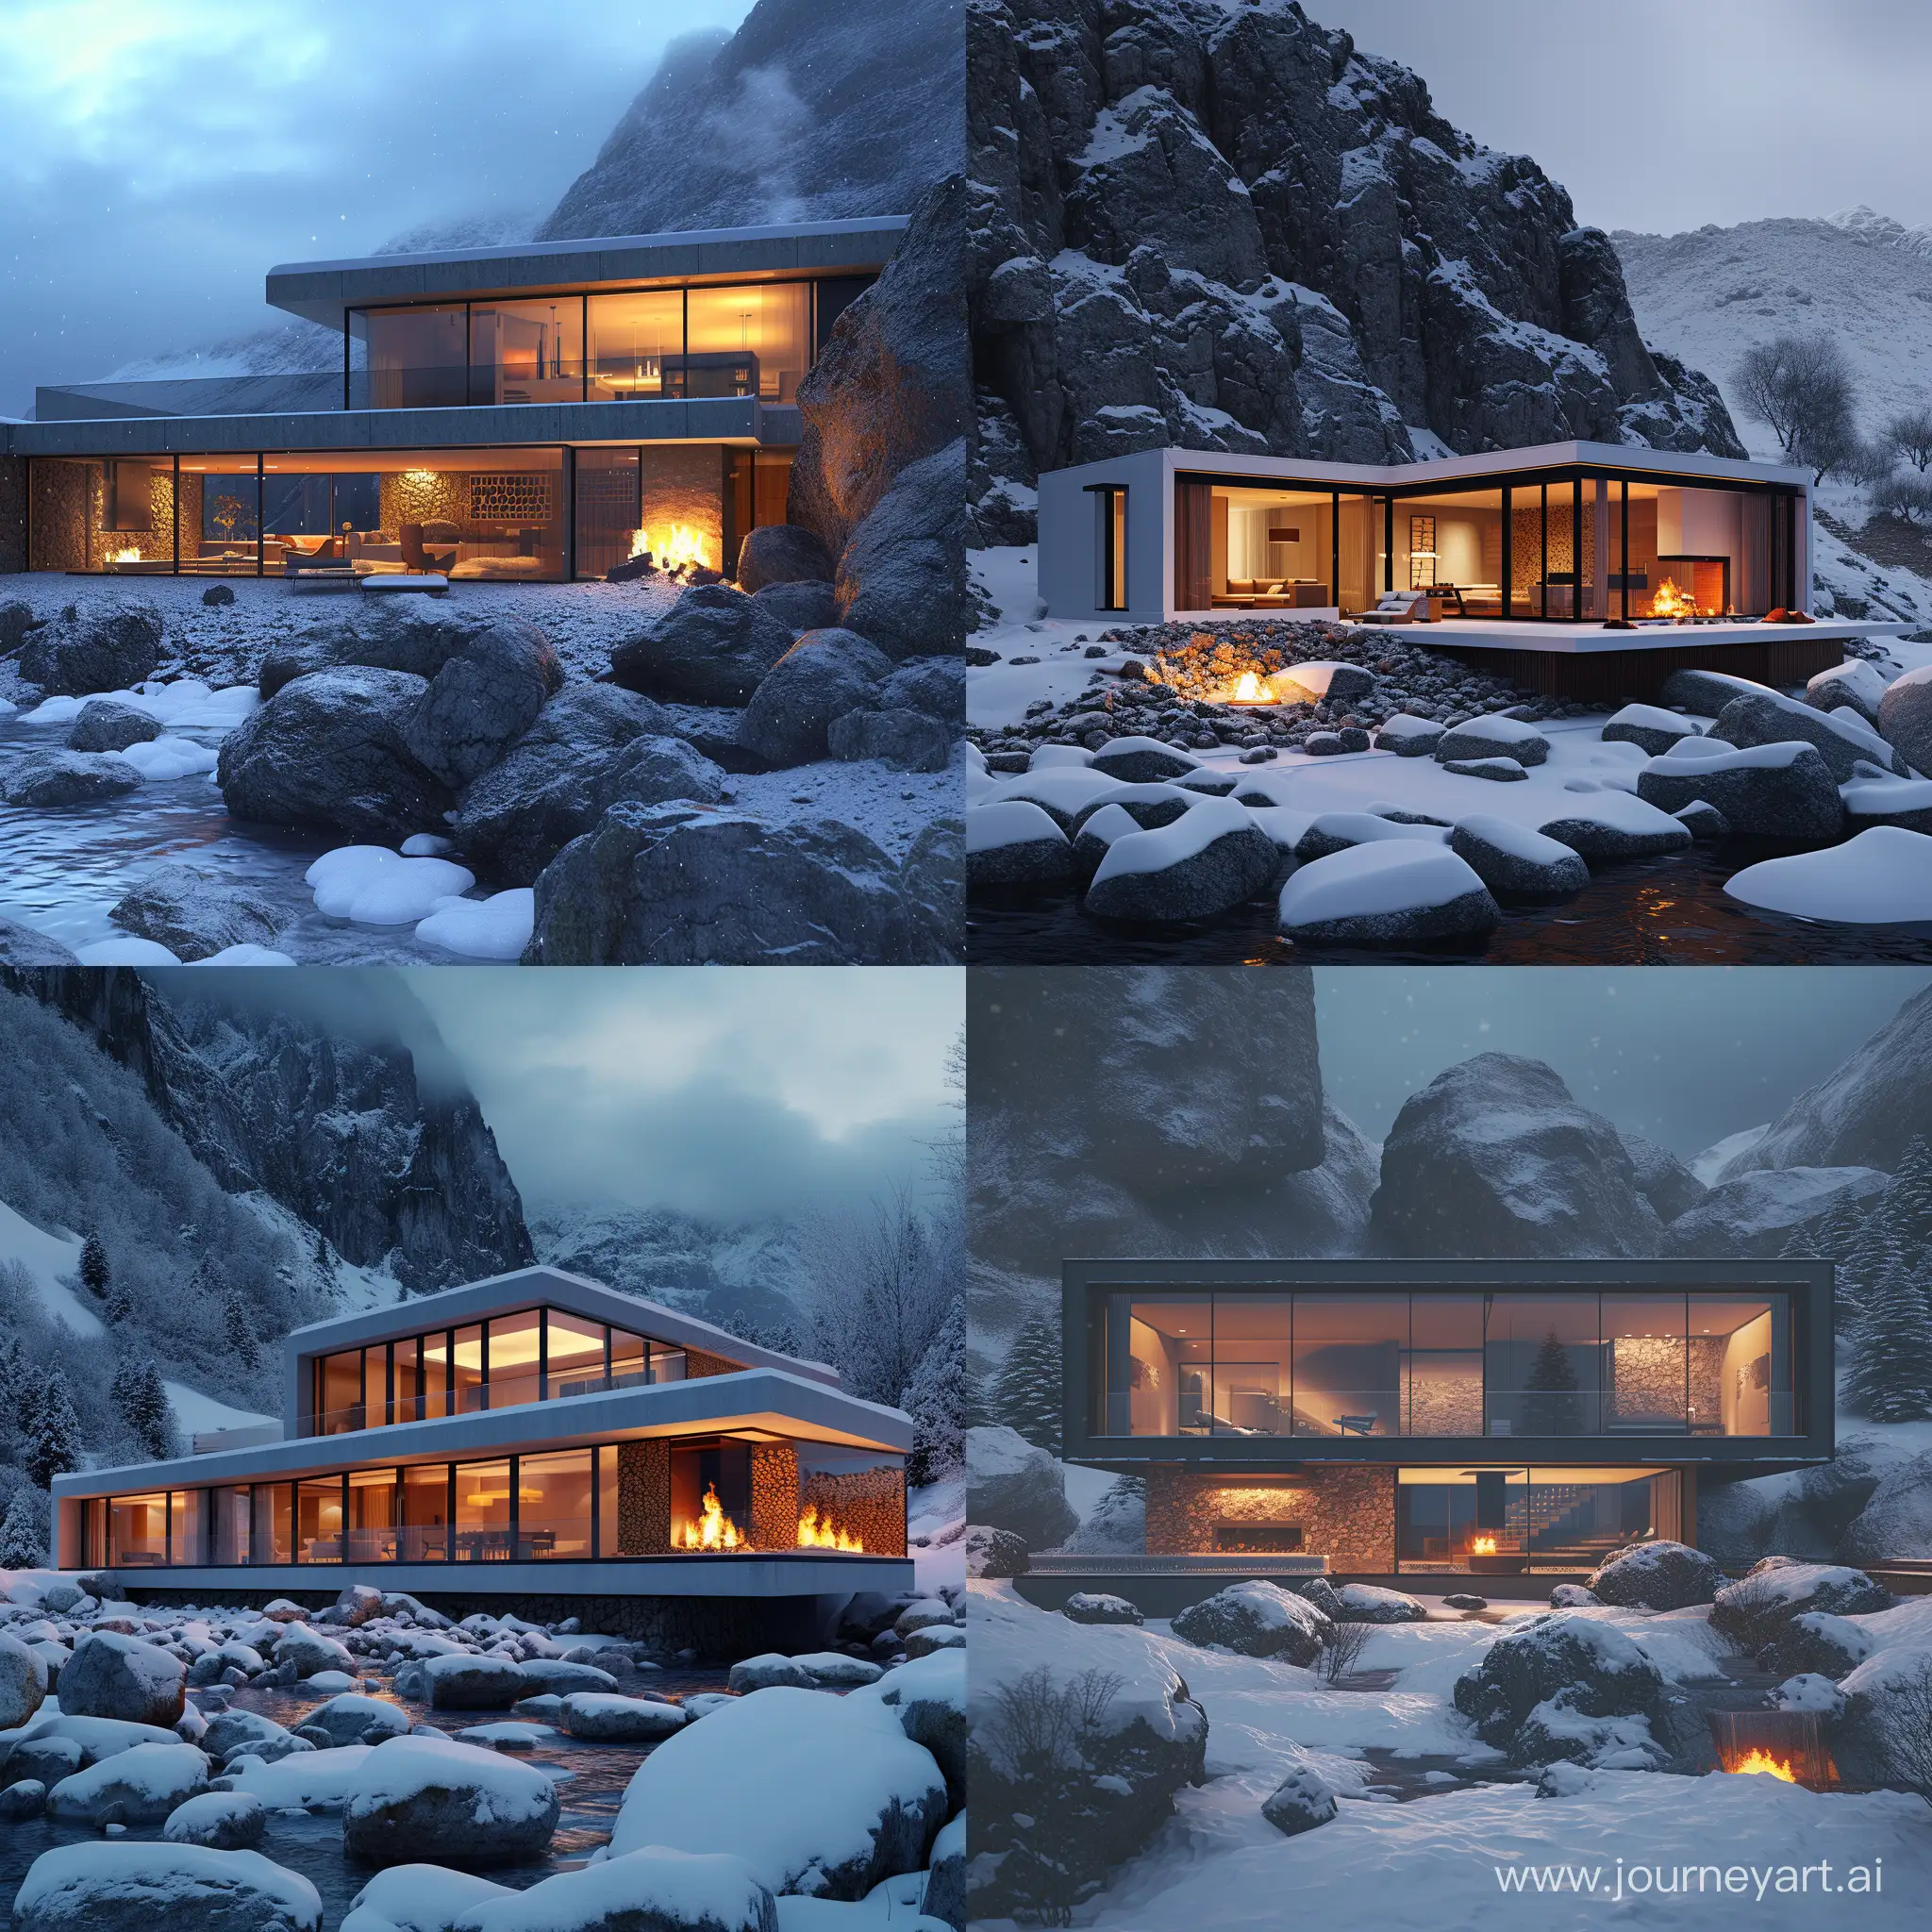 Luxurious-Mountain-Villa-Snowy-Retreat-with-Glossy-Facade-and-Warm-Fireplace-Ambience